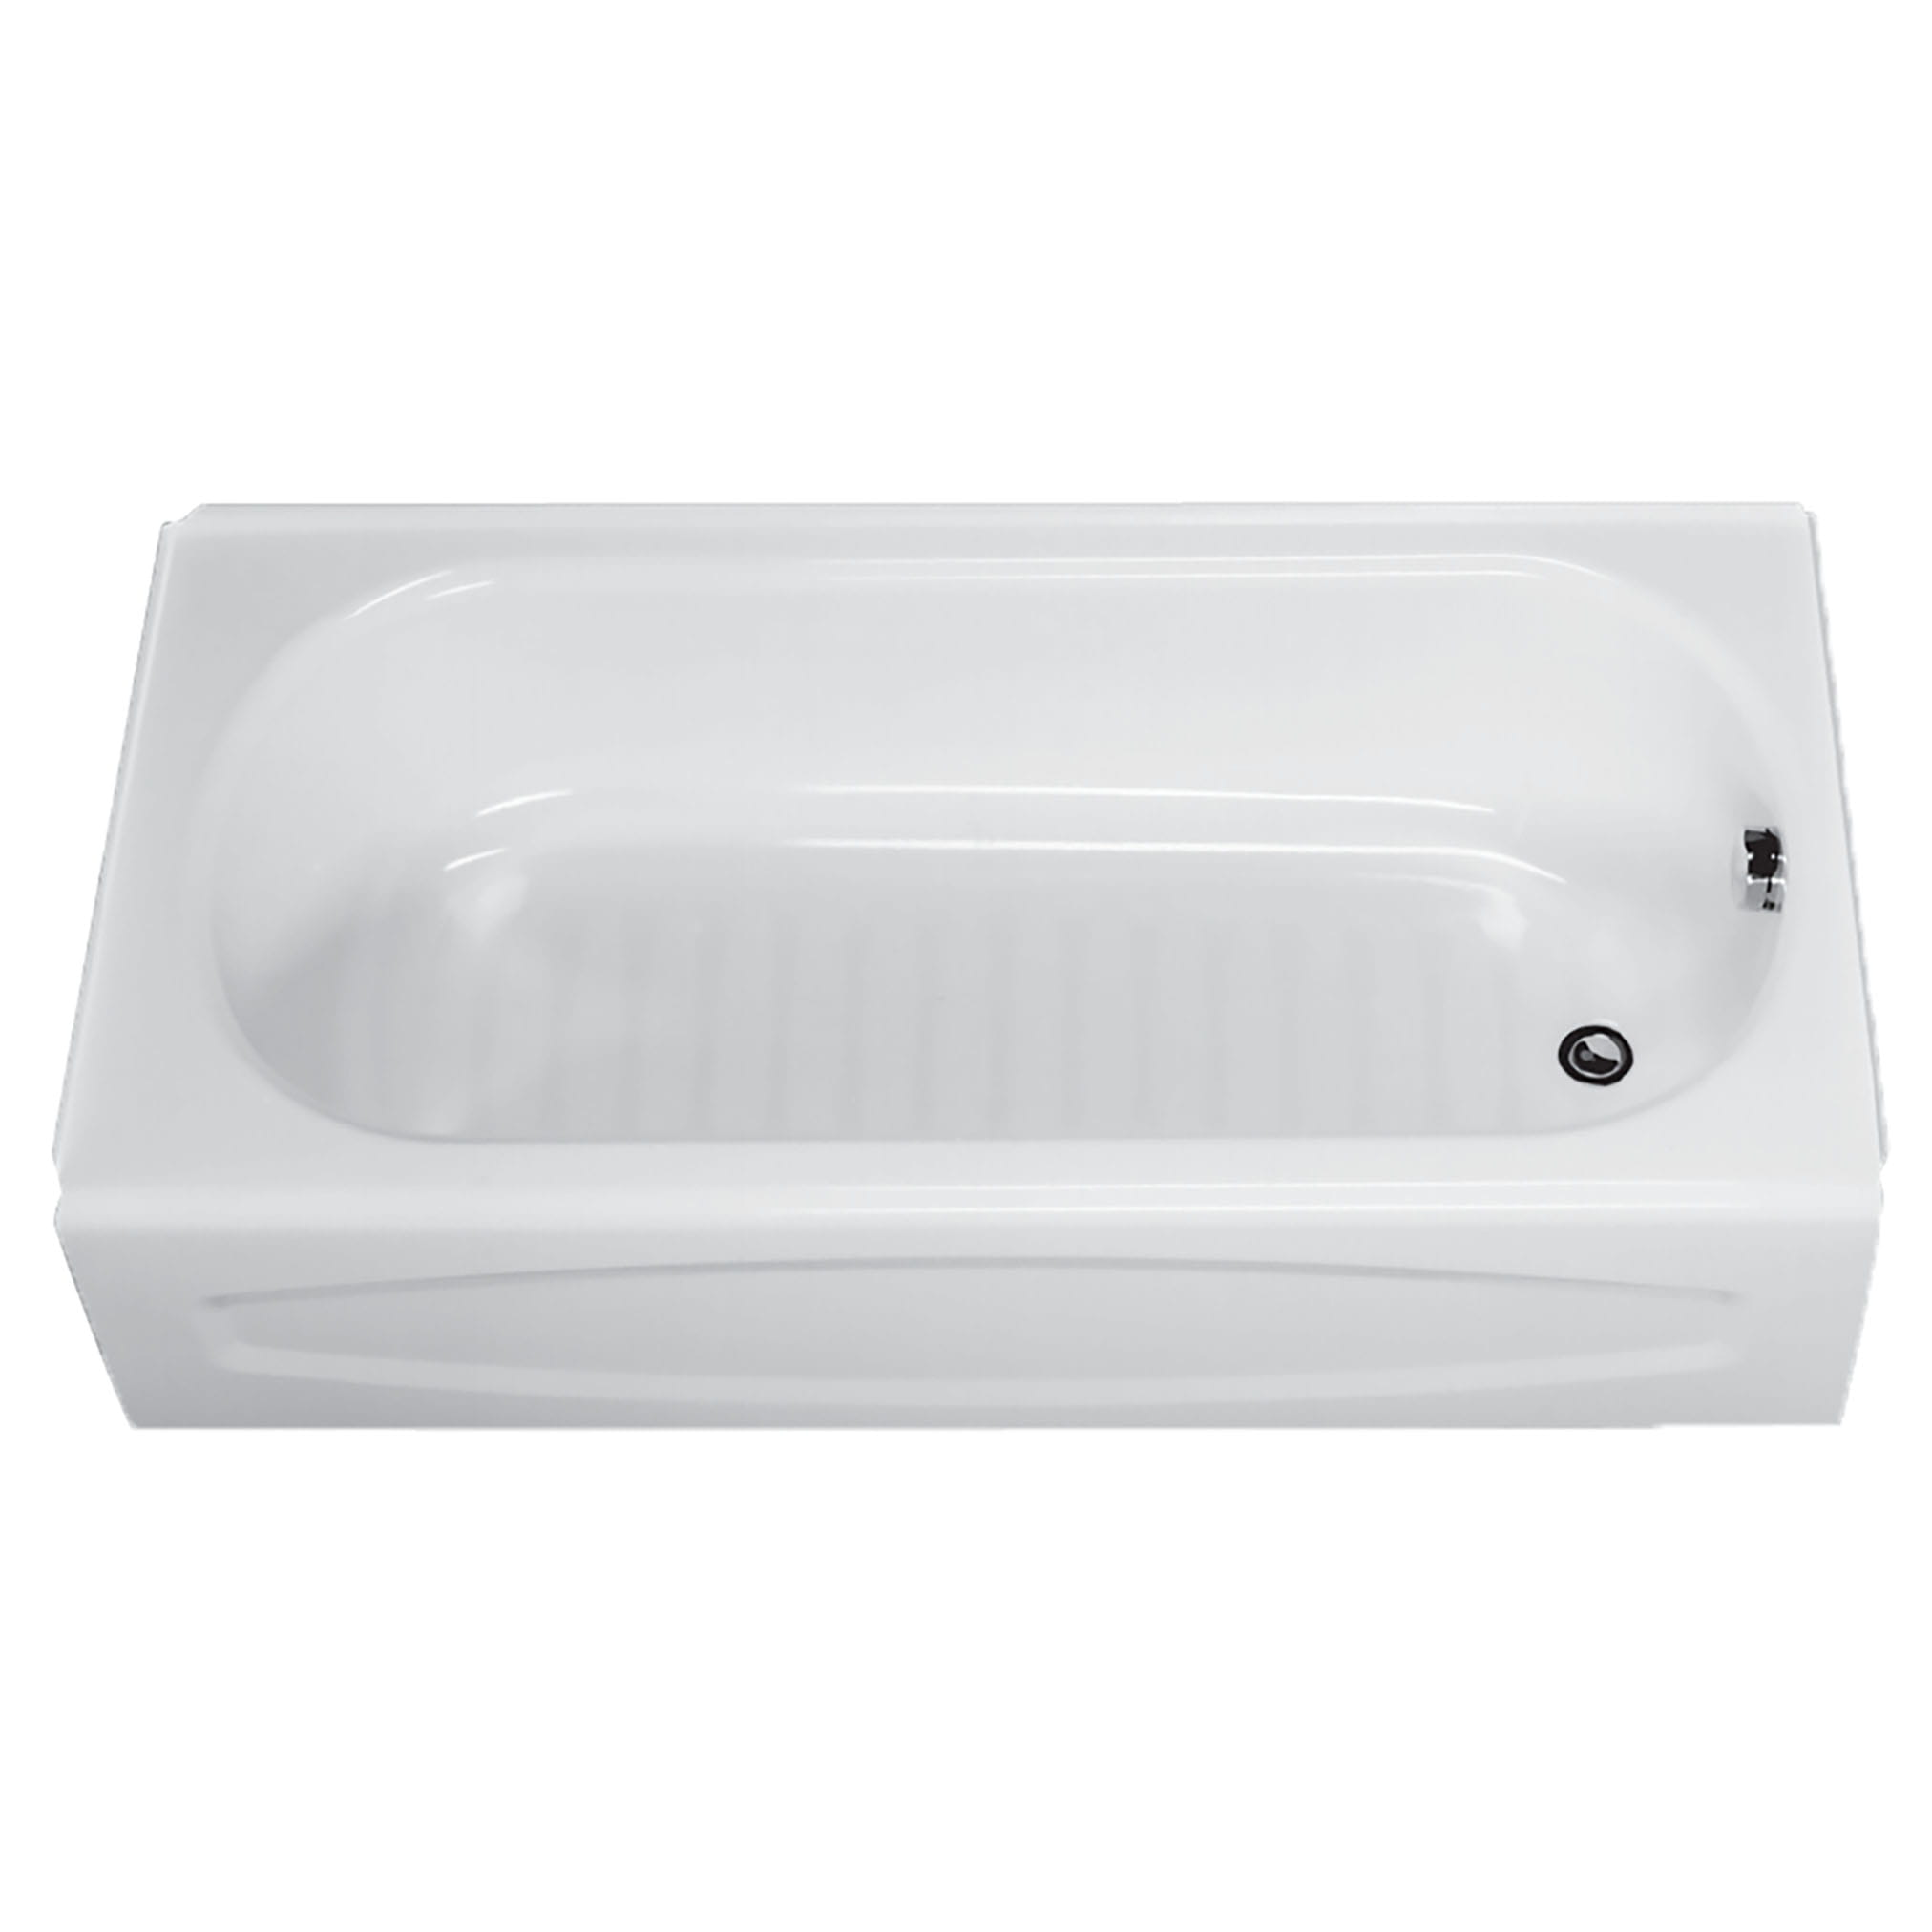 New Salem™ 60 x 30-Inch Integral Apron Bathtub With Right-Hand Outlet